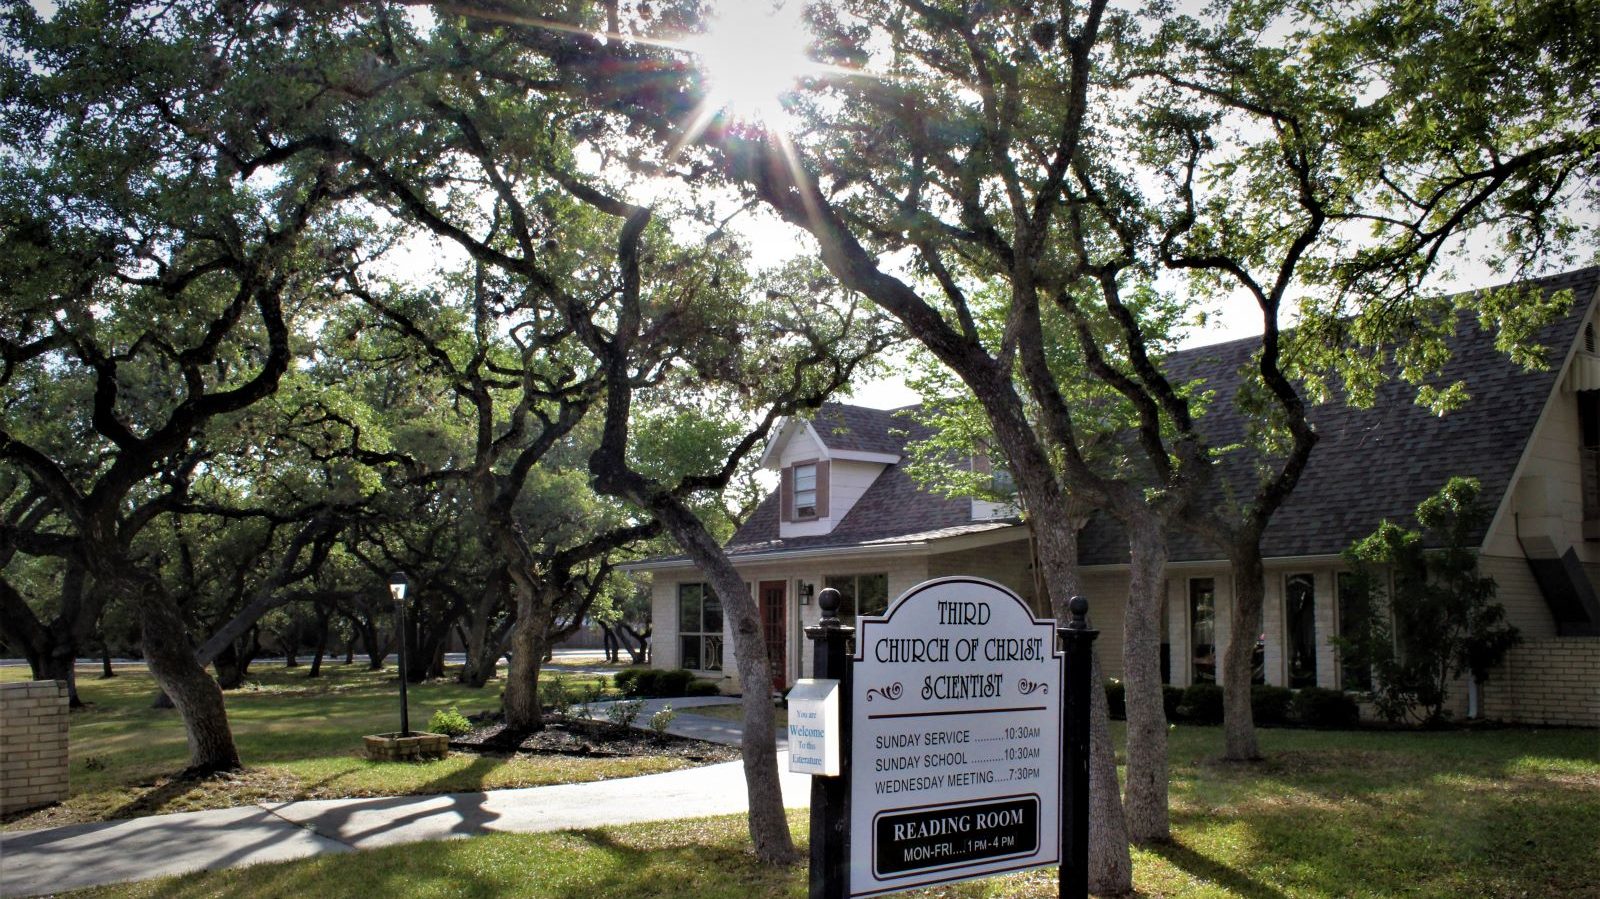 photo of the front of Third Church Christ Scientist, San Antonio. In foreground: A welcoming sign with the text "Third Church of Christ Scientist" with hours. Many beautiful oak trees shade the building, and sun beams shine through the trees at top center.